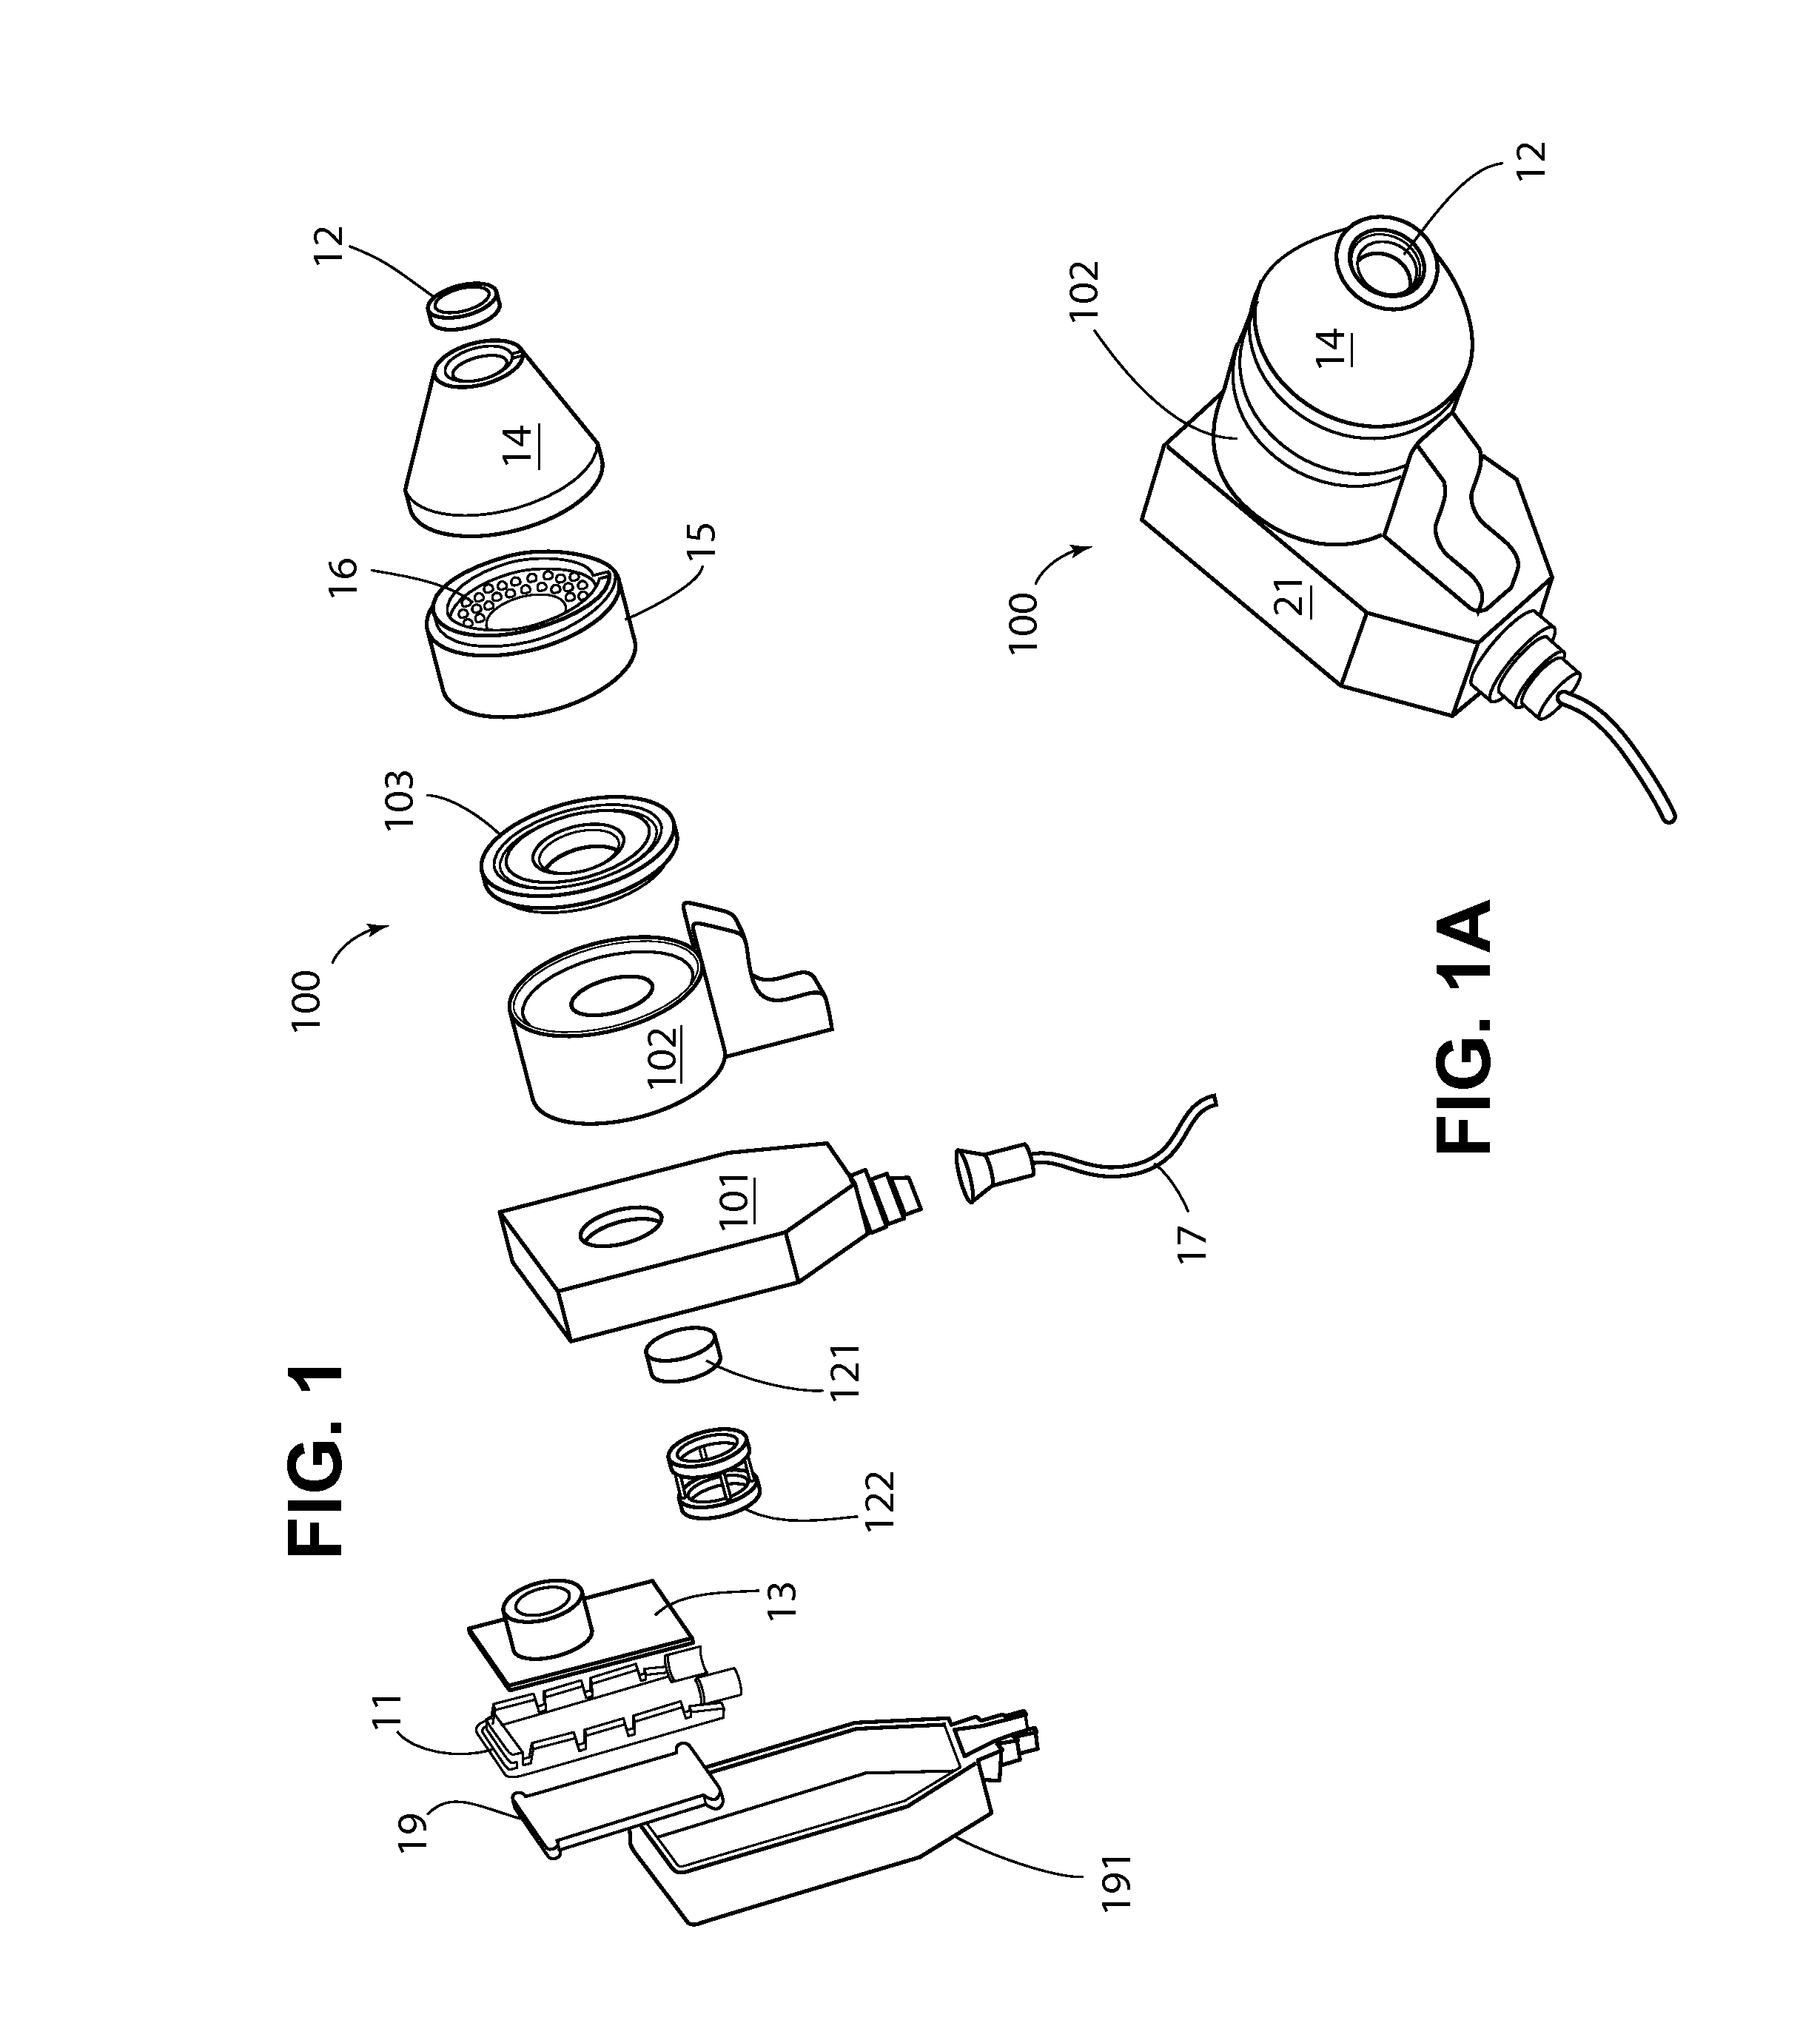 System and method for optical detection of skin disease